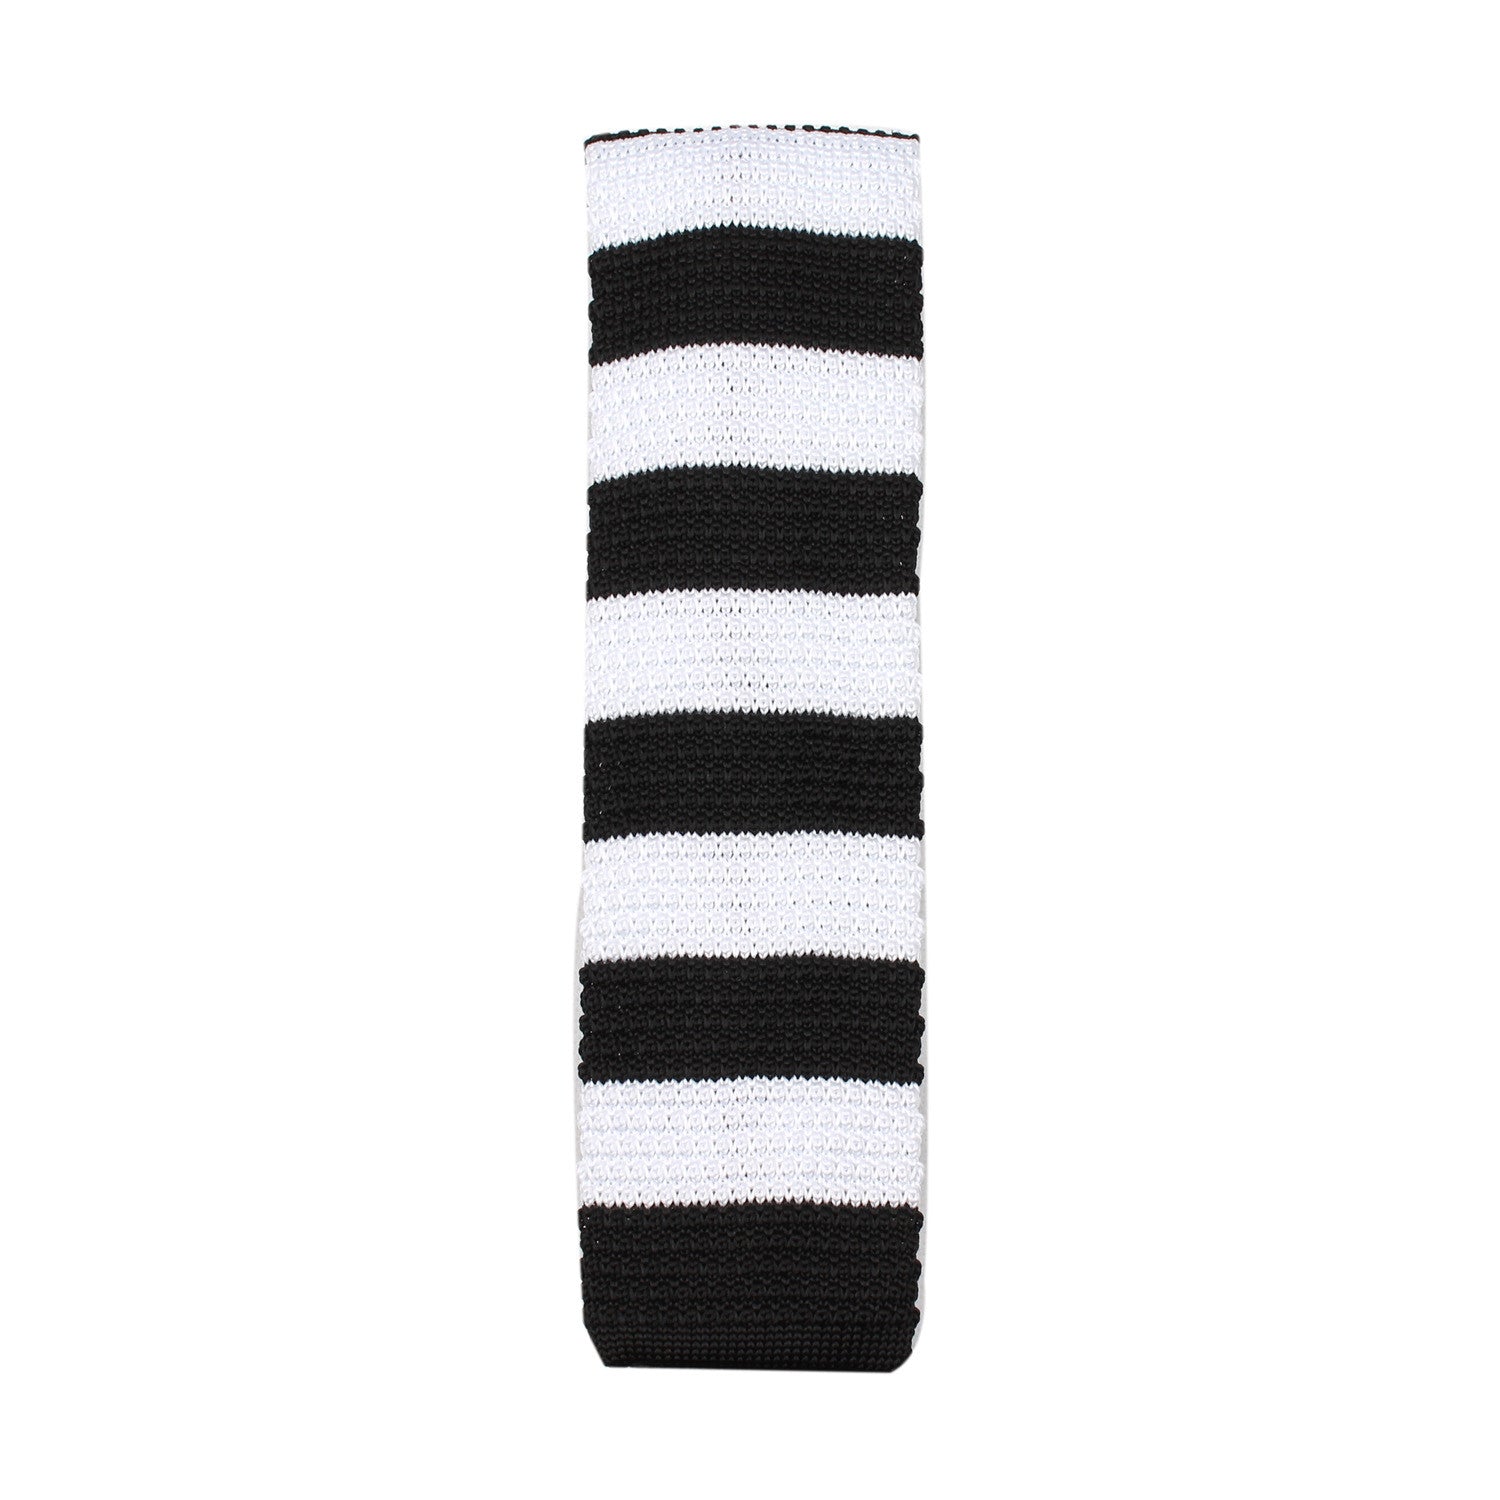 Black & White Thick Stripes Knitted Tie Vertical View